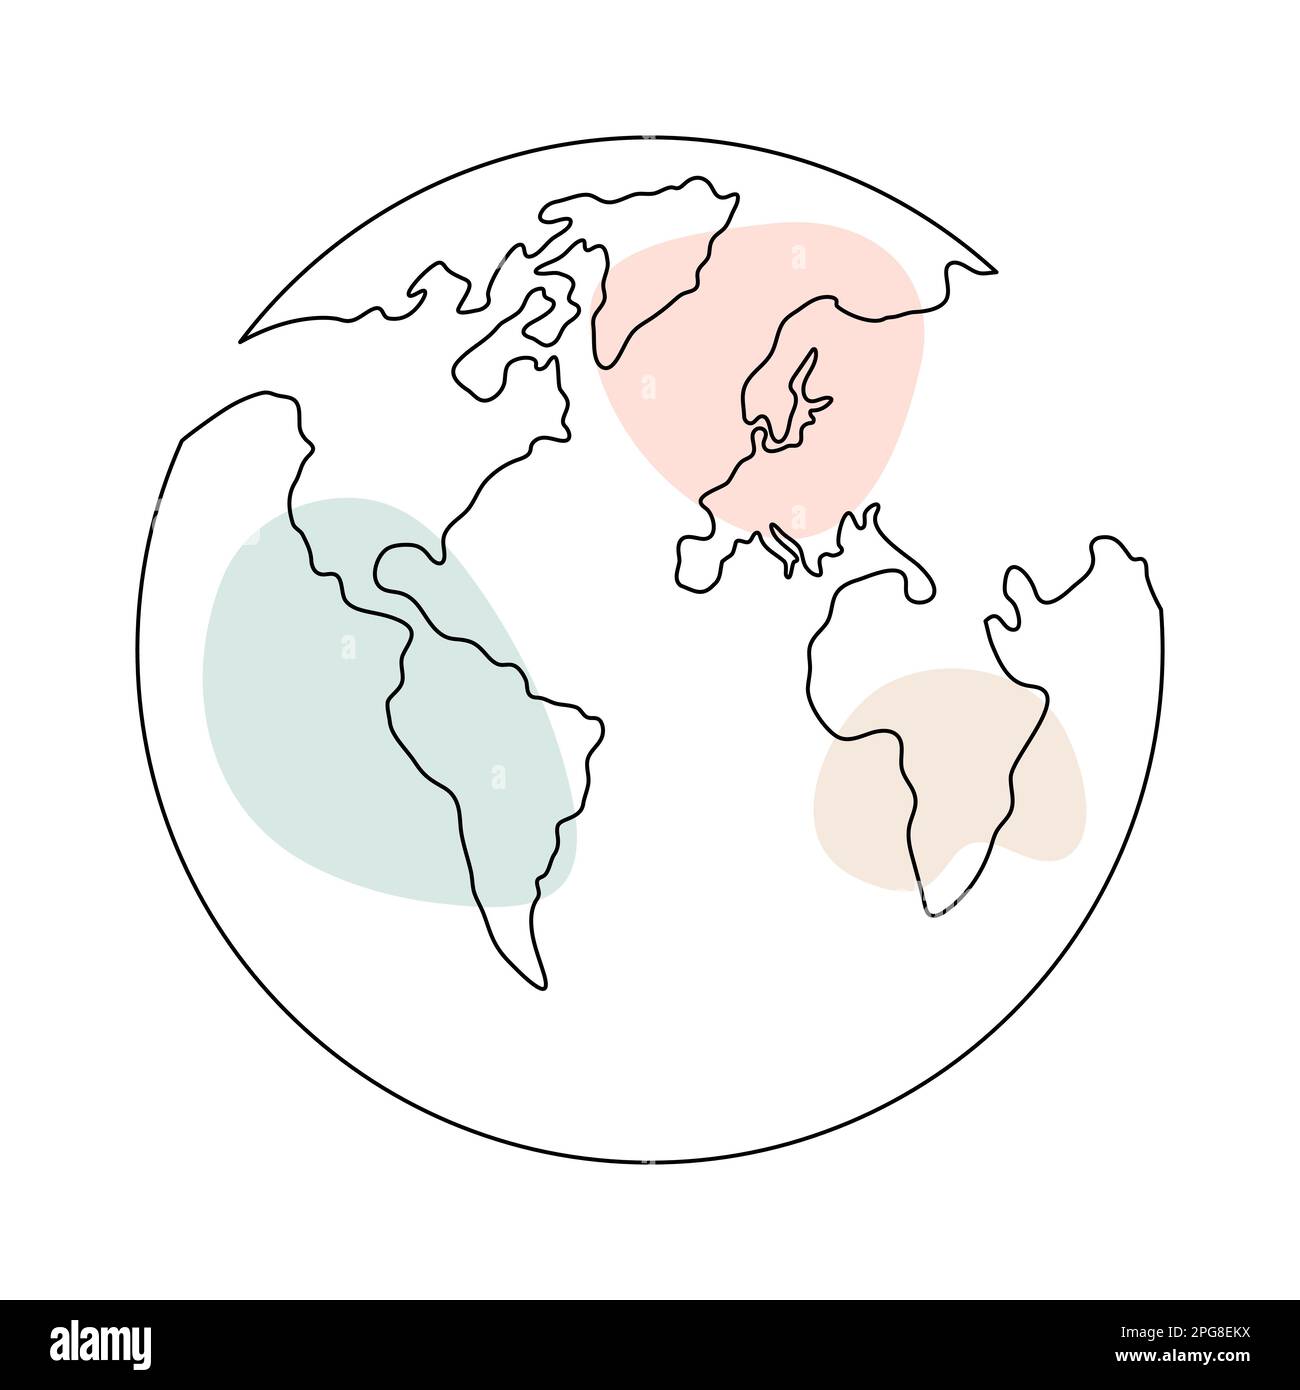 Earth globe continuous one line art. World map doodle linear drawing with pastel shapes. Vector illustration isolated on white background. Stock Vector